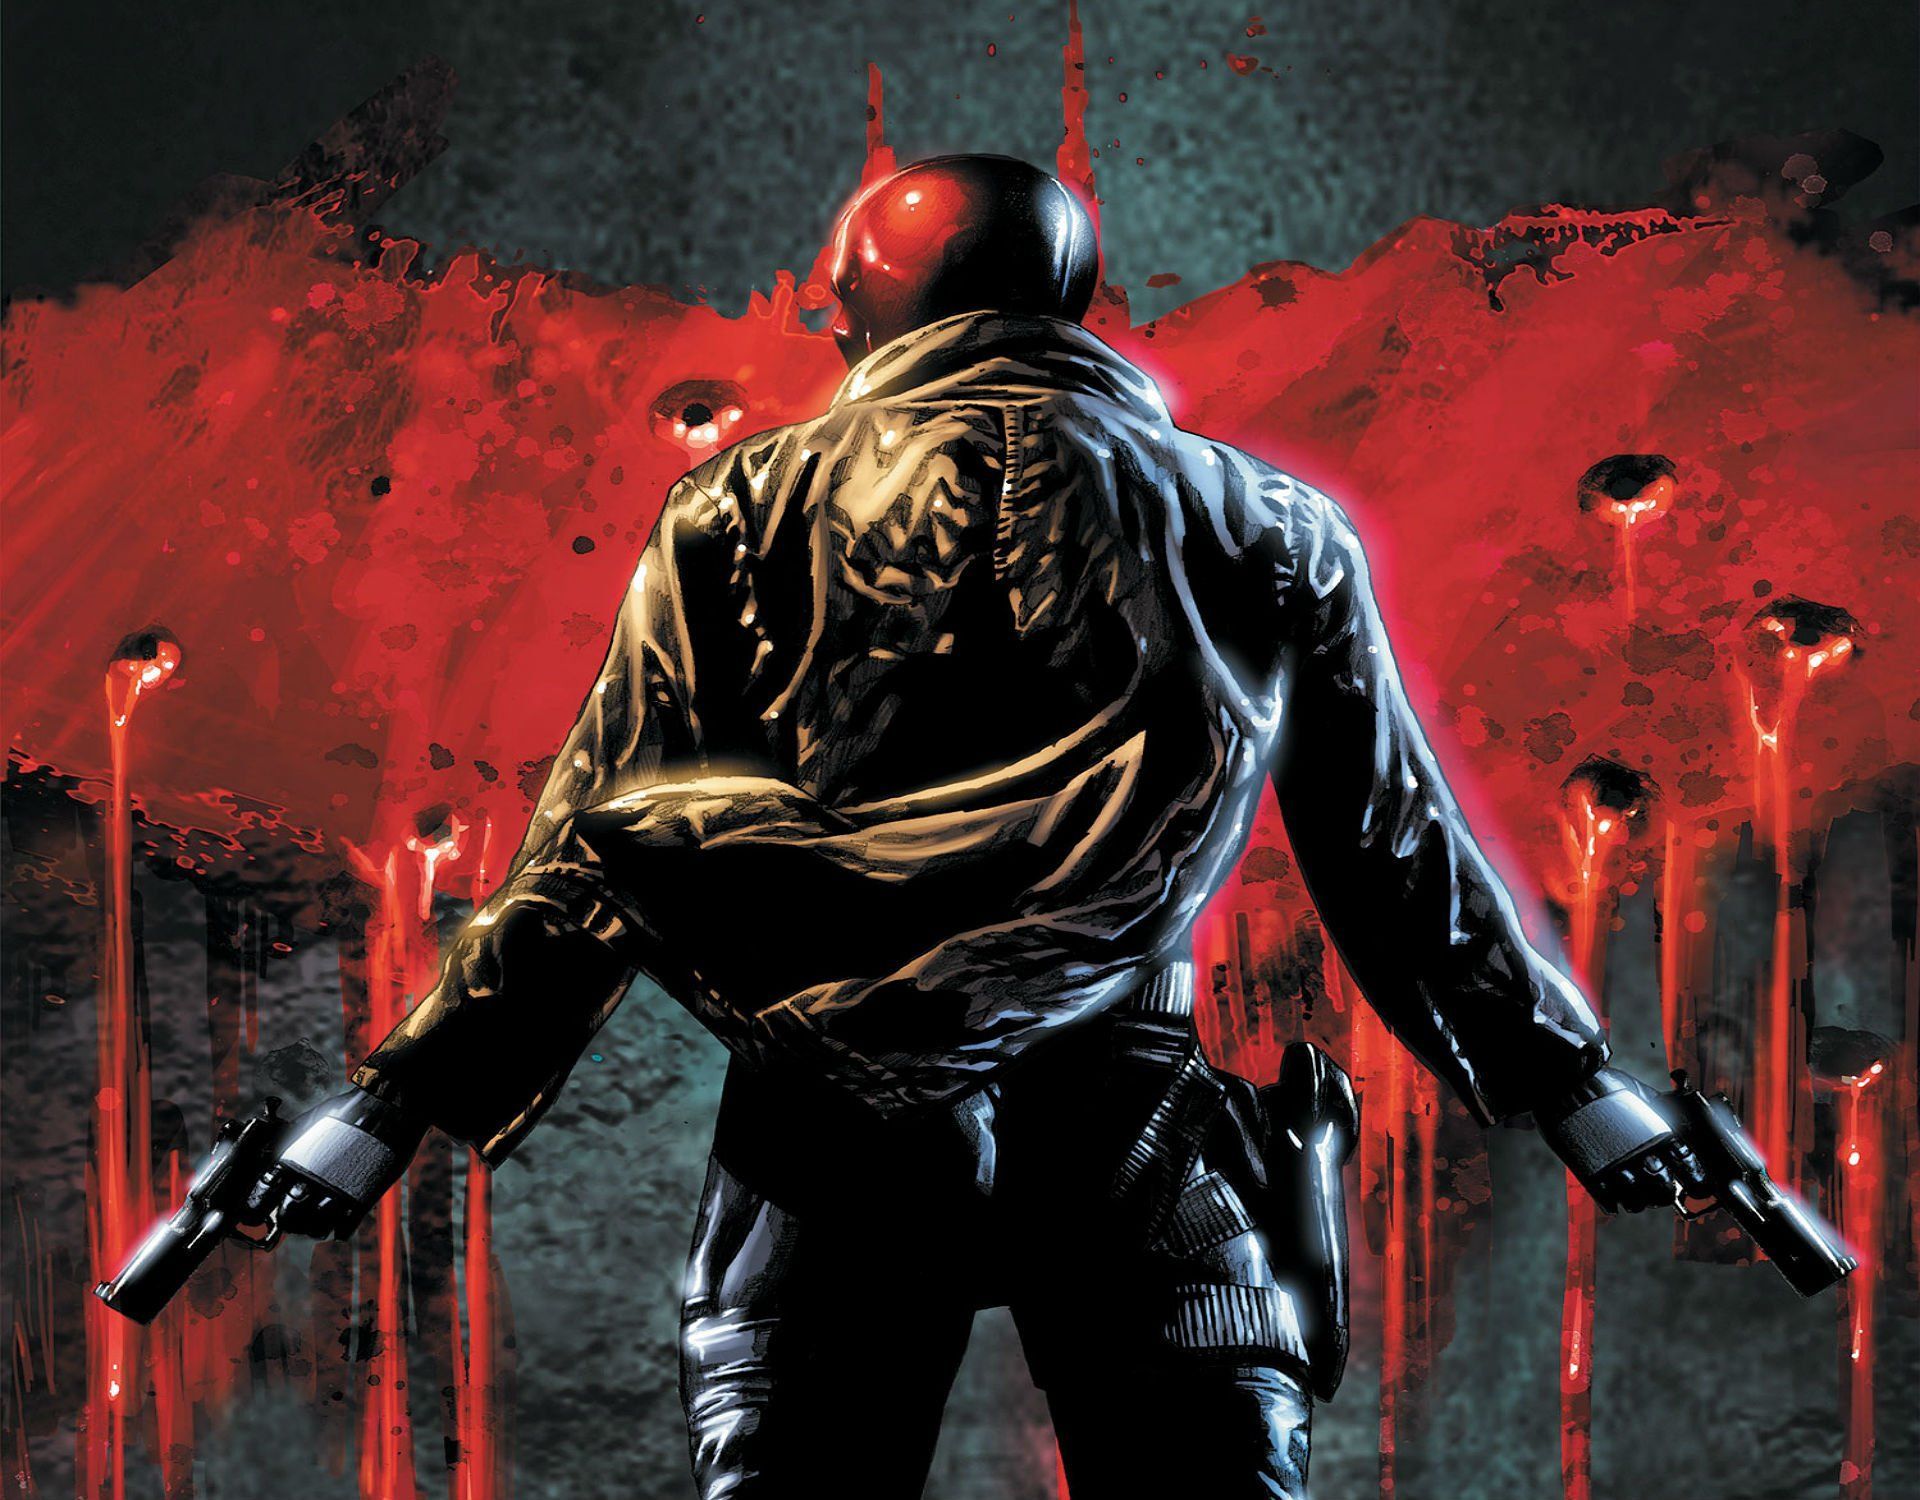 Cool red hood wallpapers